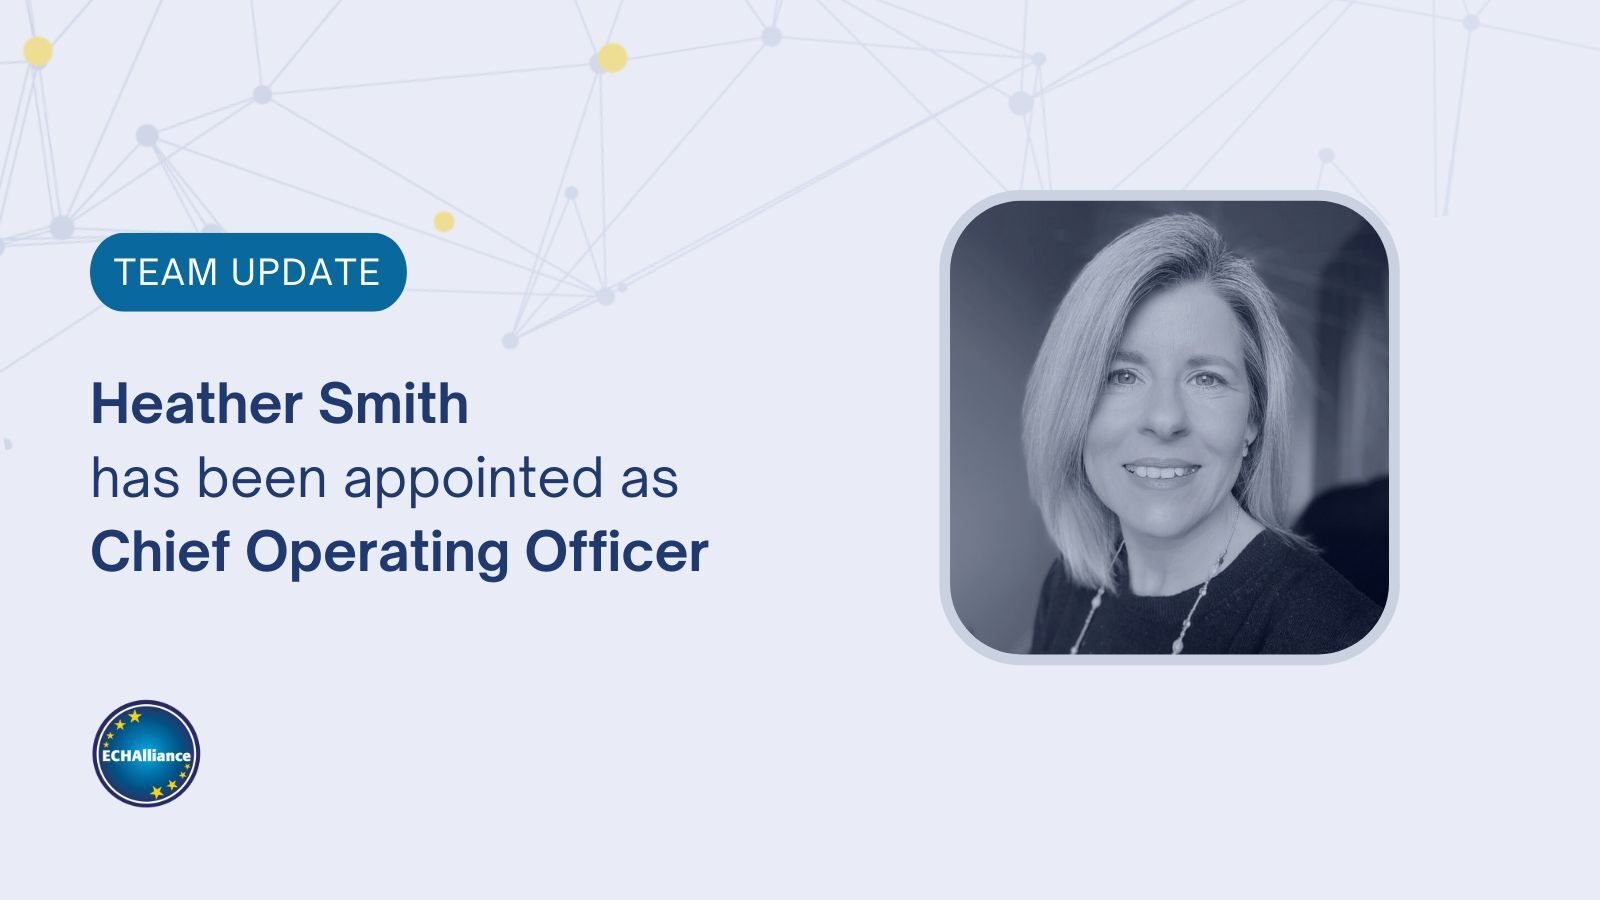 Heather Smith has been appointed as Chief Operating Officer